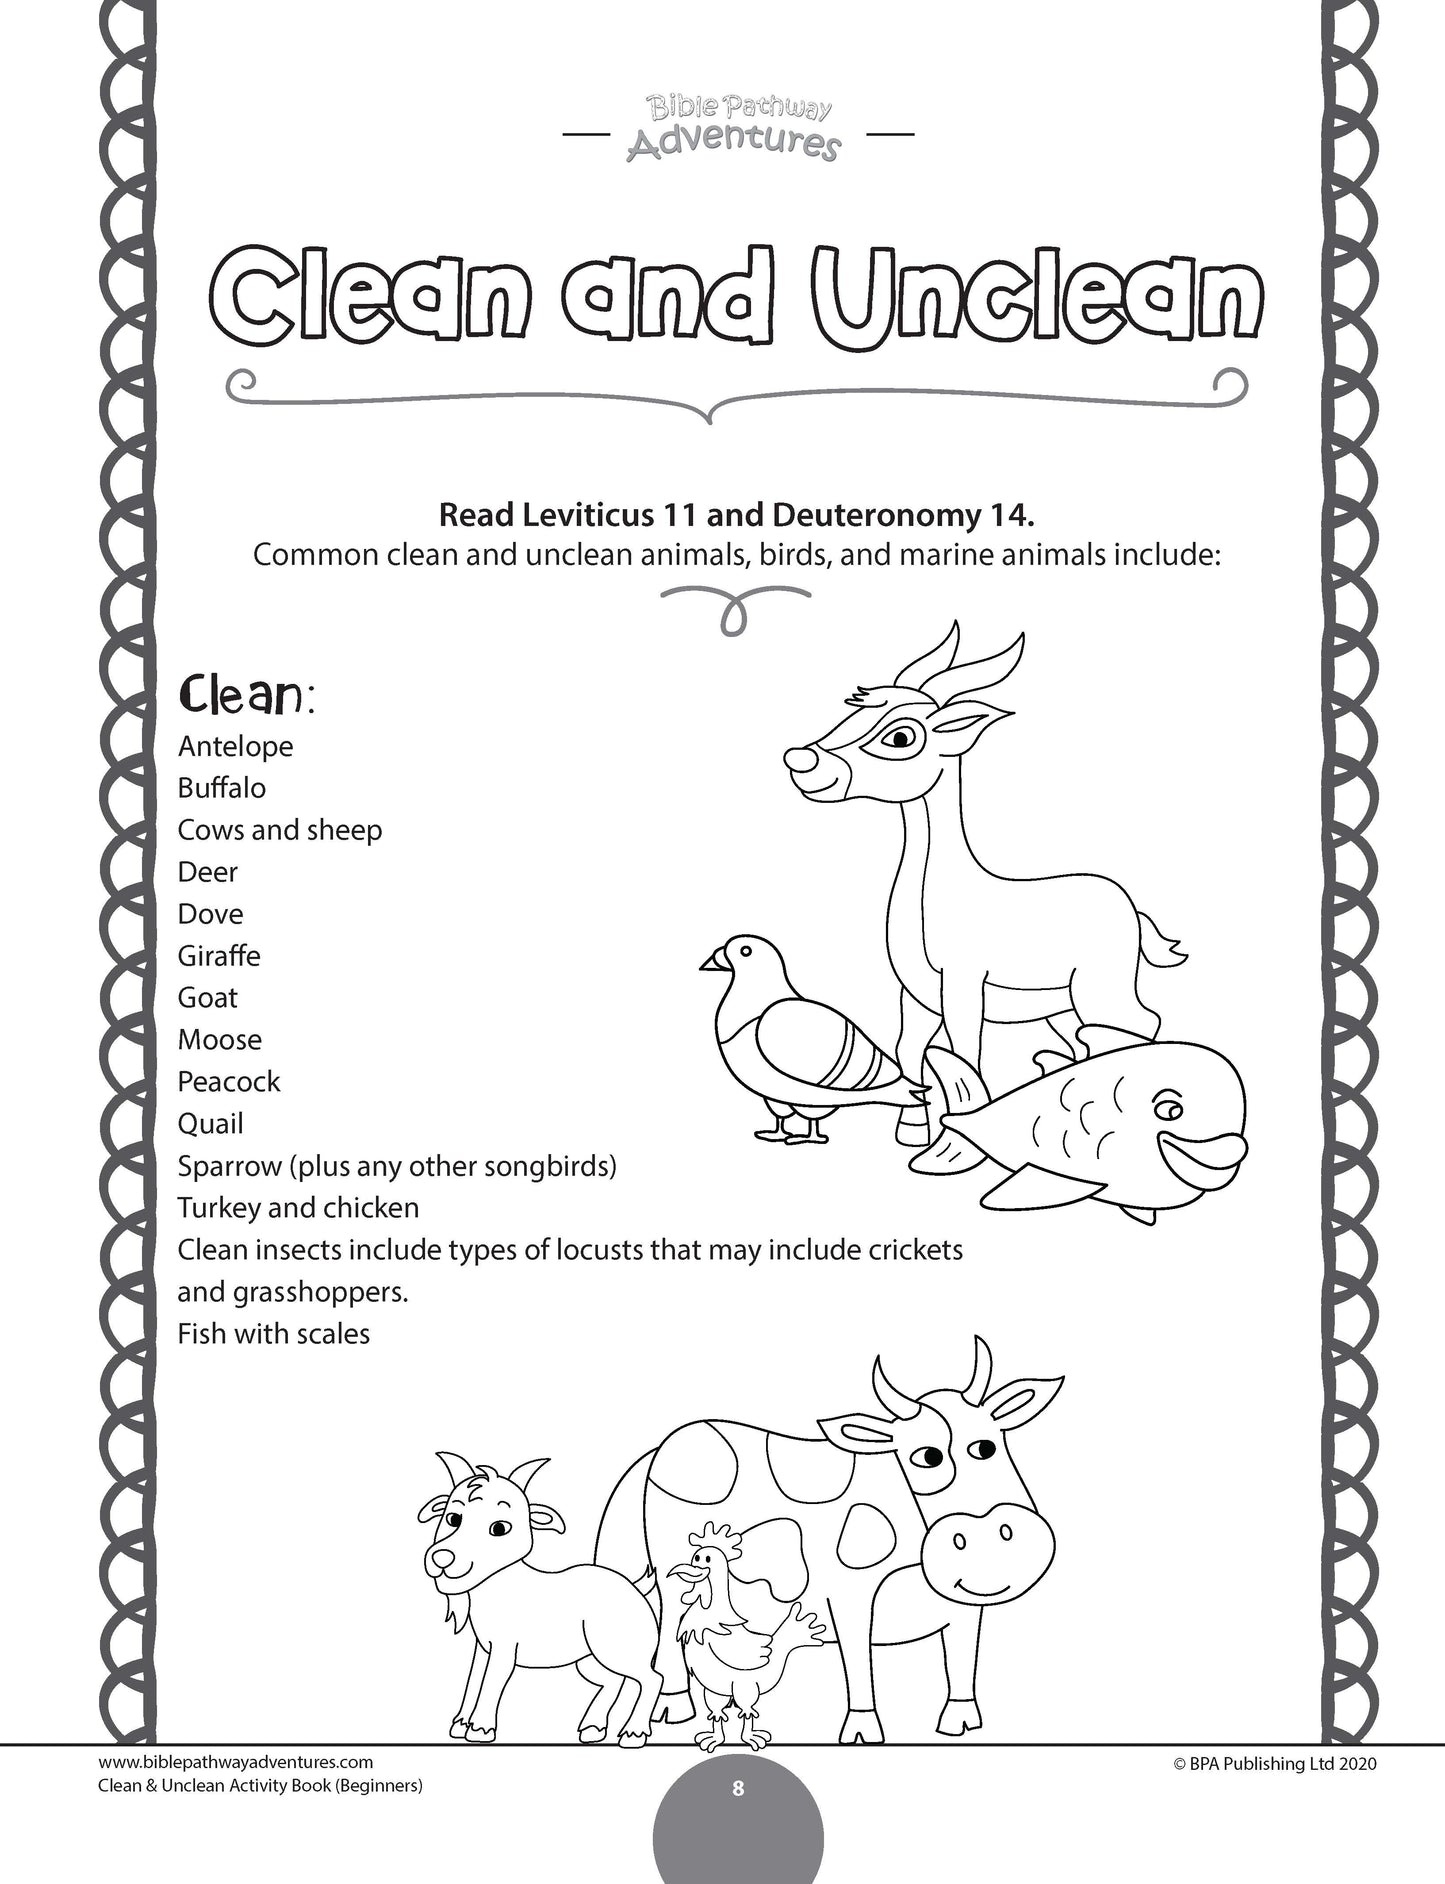 Clean and Unclean Activity Book for Beginners (paperback)